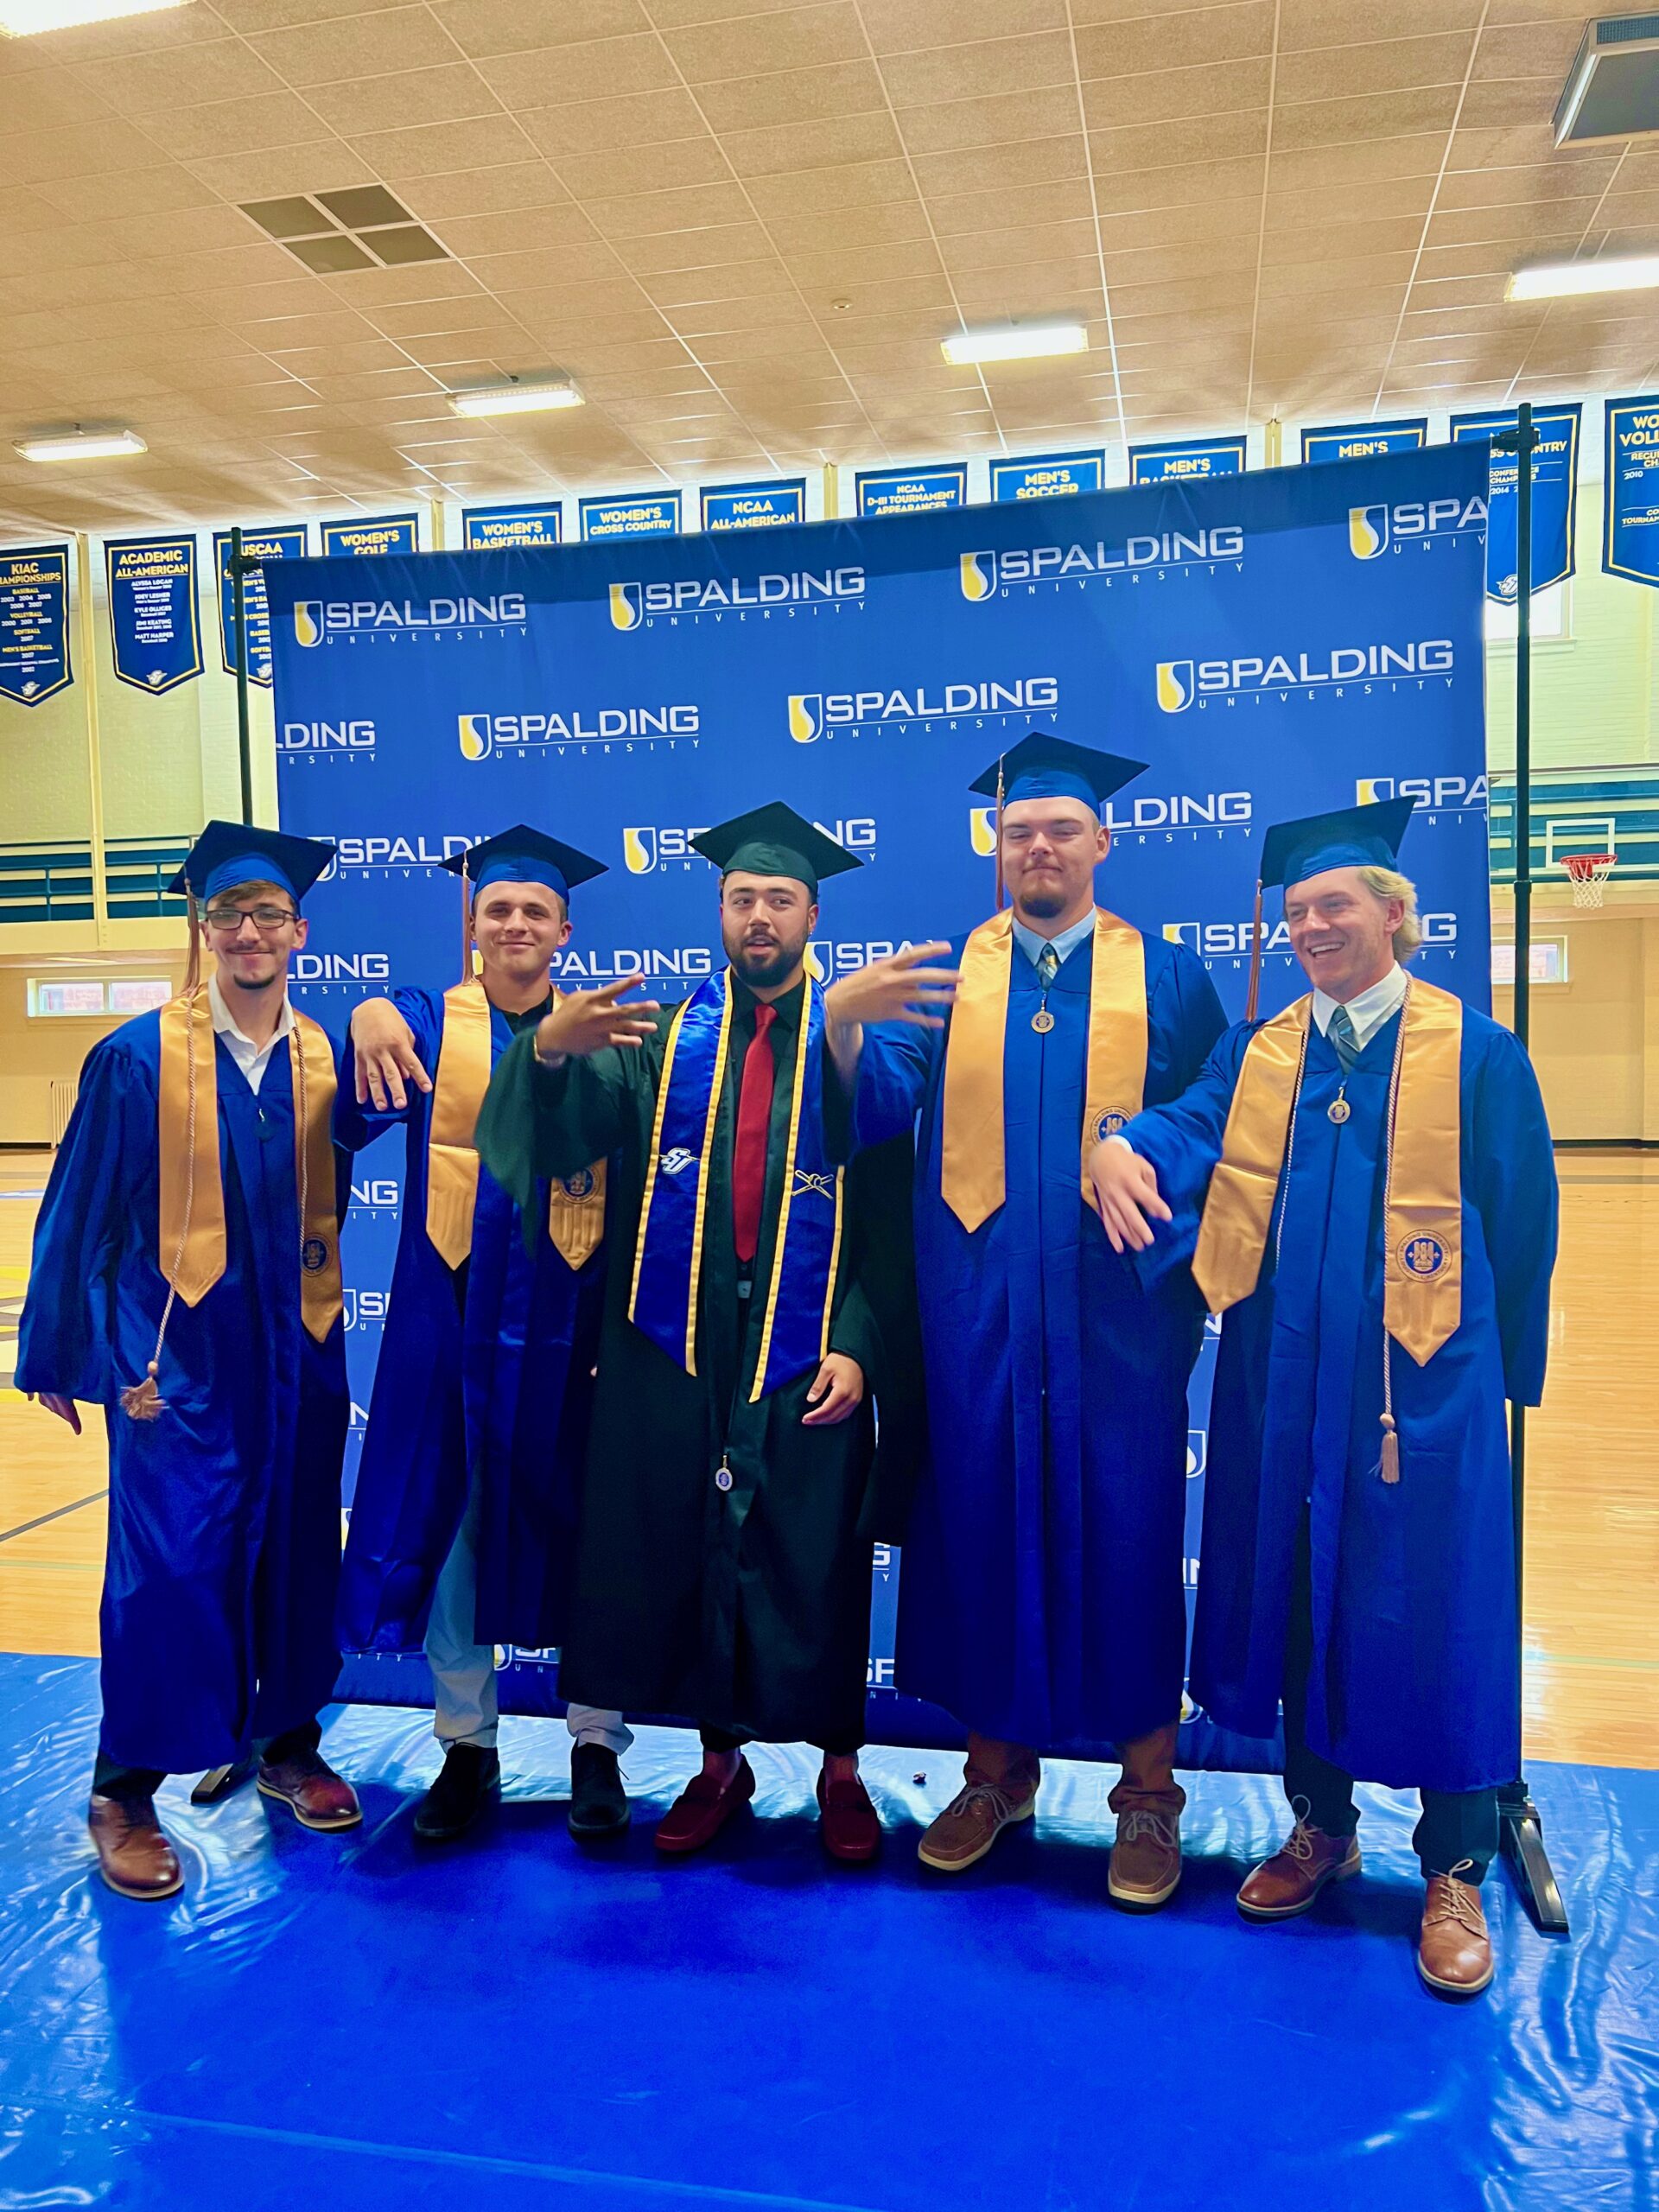 Group of Spalding graduates posing in front of Spalding backdrop